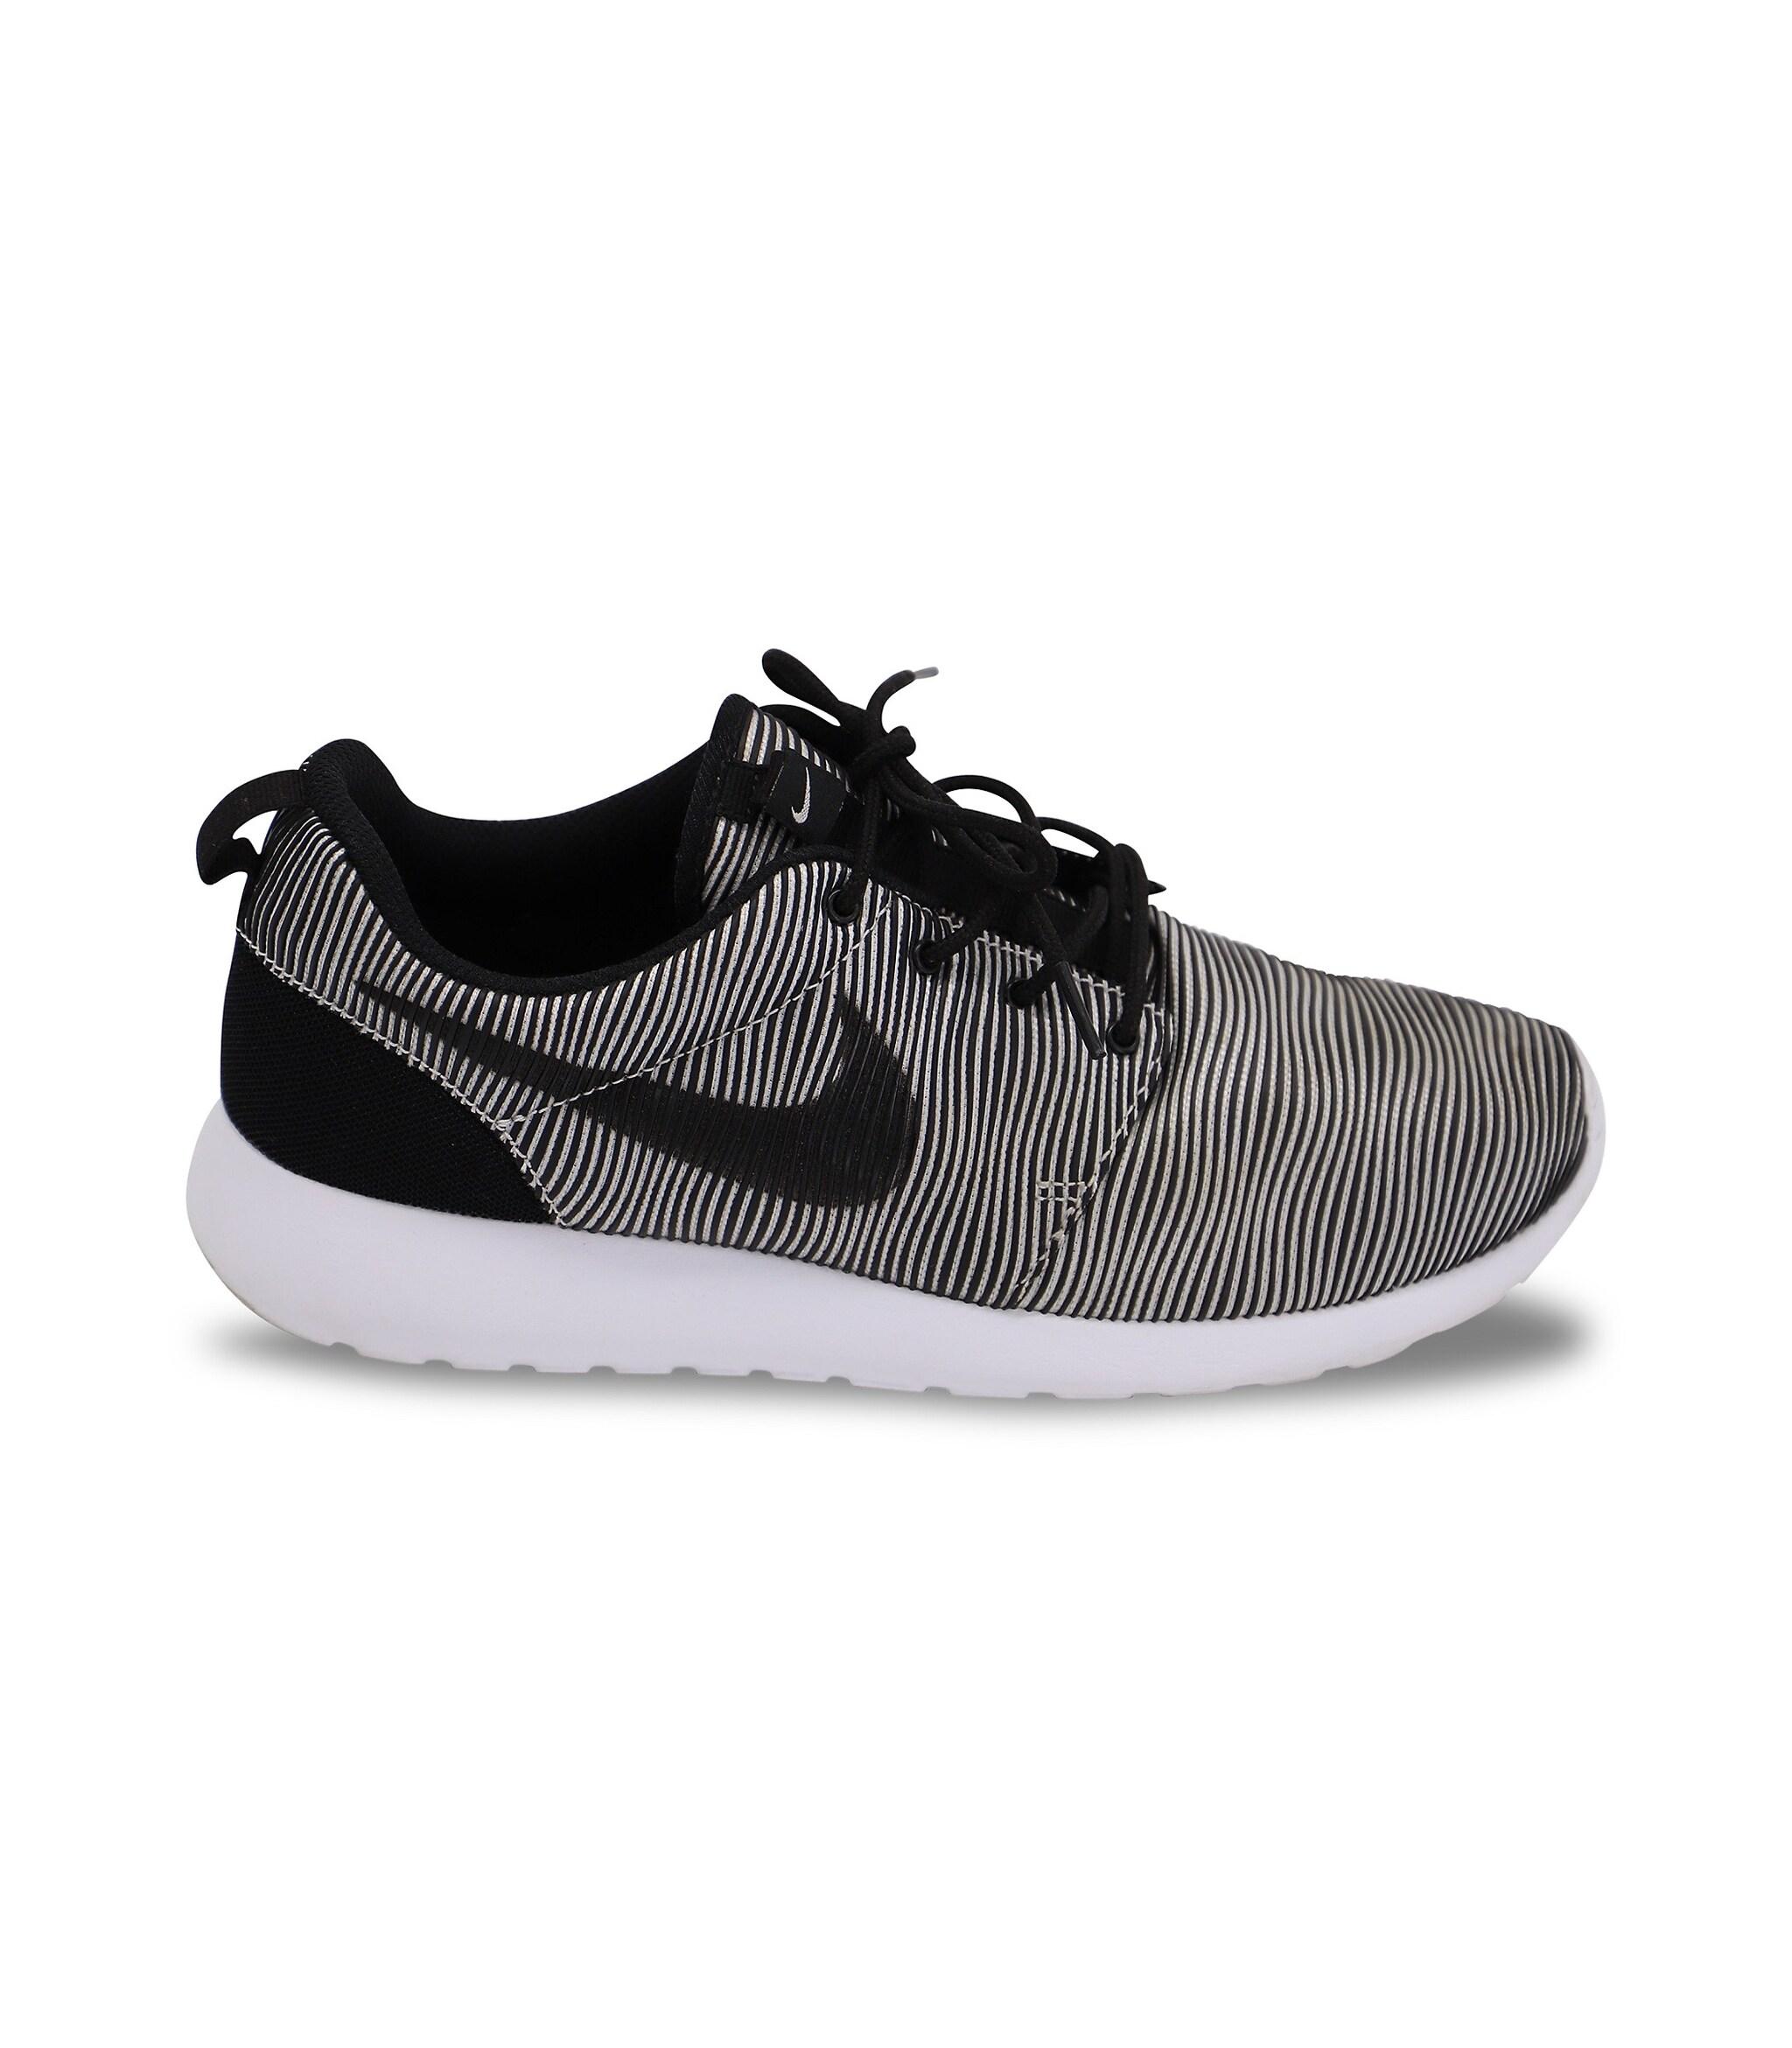 Nike Roshe Run Premium Plus Striped Sneakers In Black And White Nylon  Athletic Shoes Sneakers | Lyst